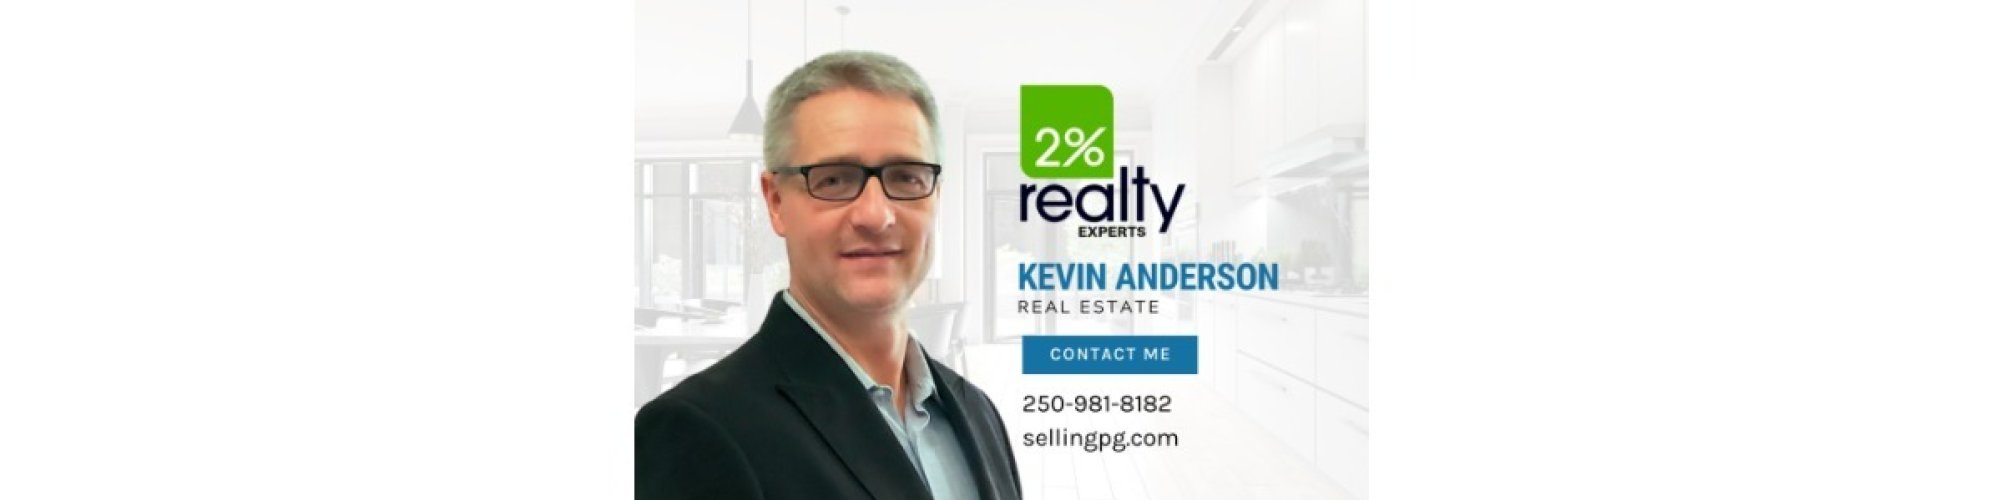 Kevin Anderson, Realtor - 2 Percent Realty Experts